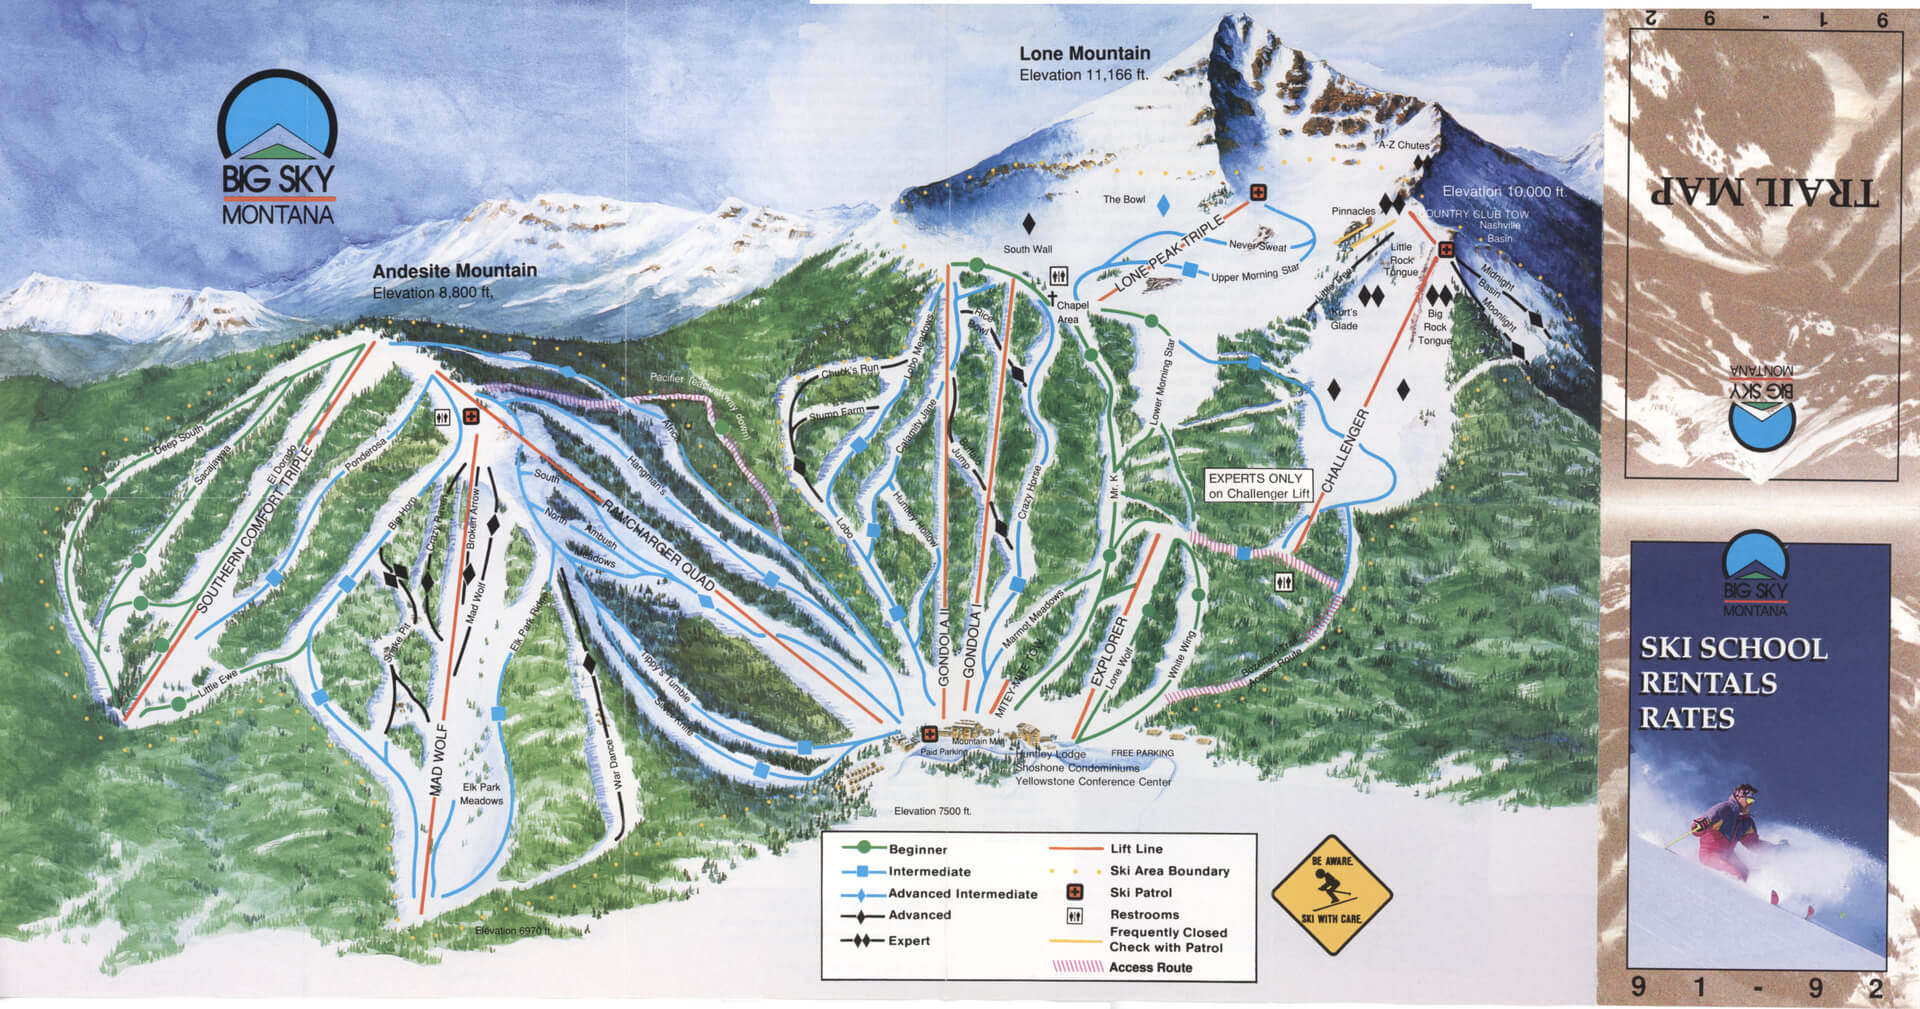 Big Sky Trail Map from 1991